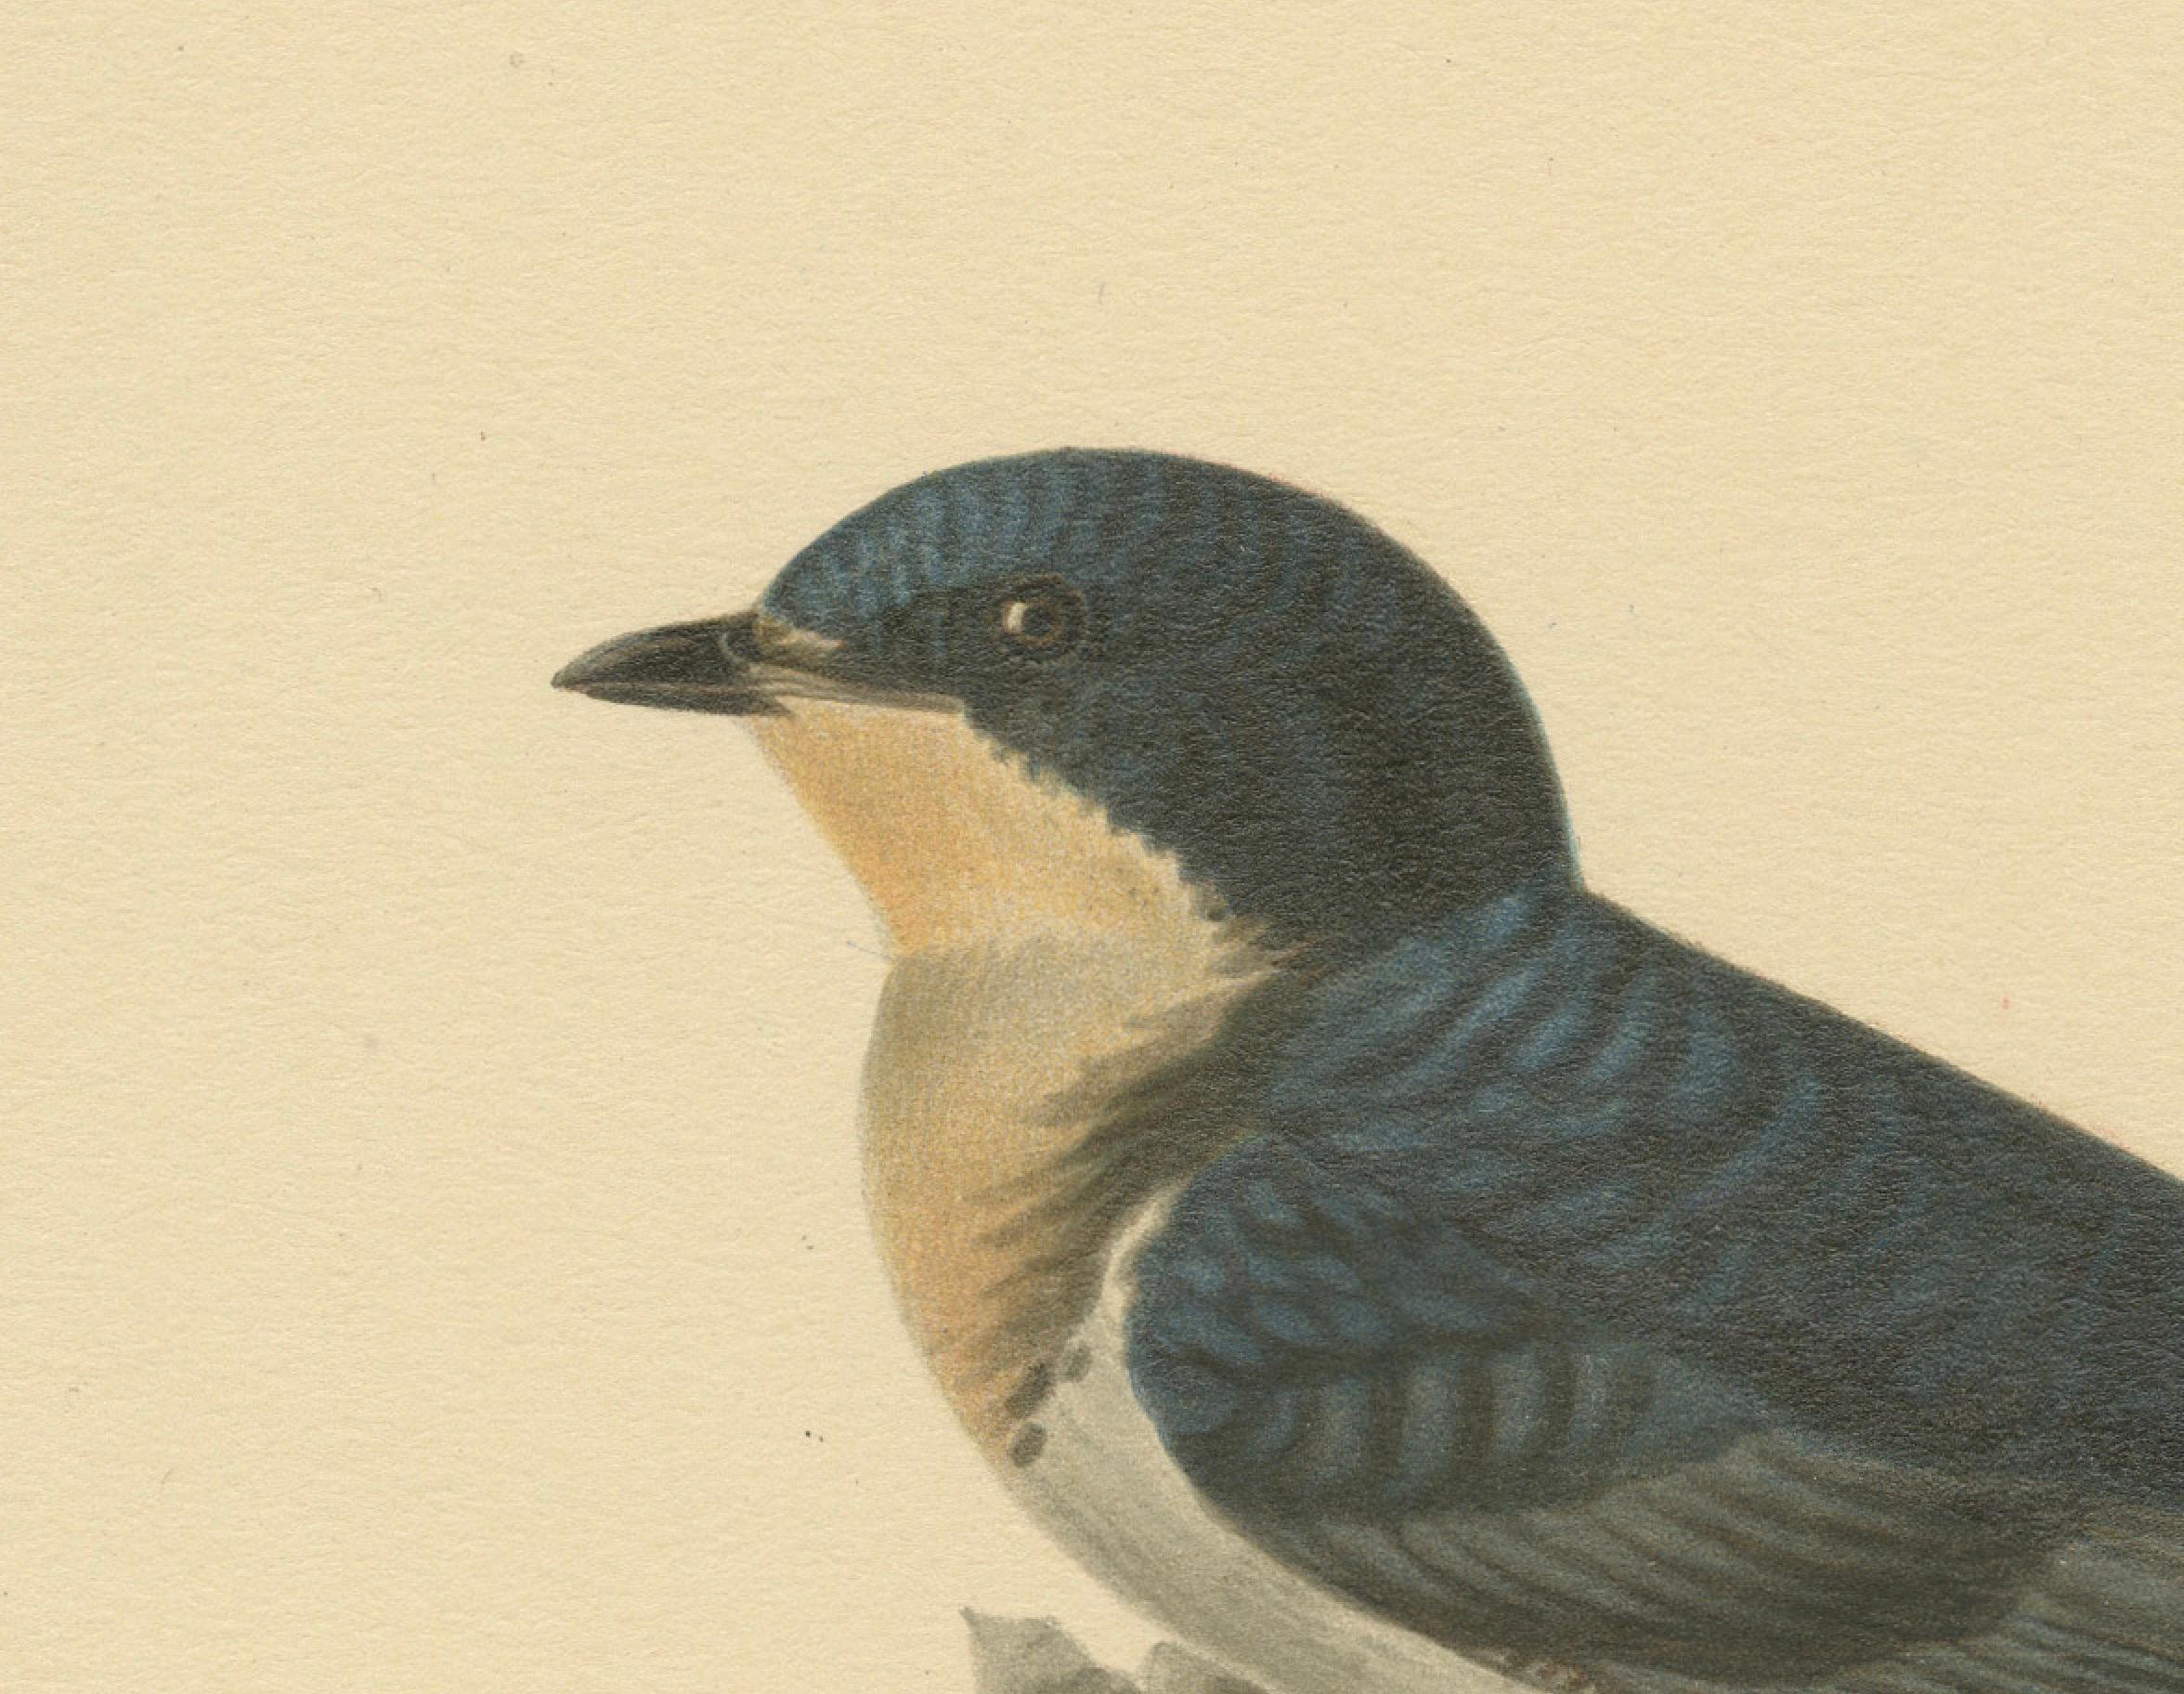 This print, titled 'Chelidon Rustica', showcases a Barn Swallow perched delicately on what appears to be a cattail or a similar type of stalk. The bird is depicted in a side view, which allows a full appreciation of its sleek profile, the elongated